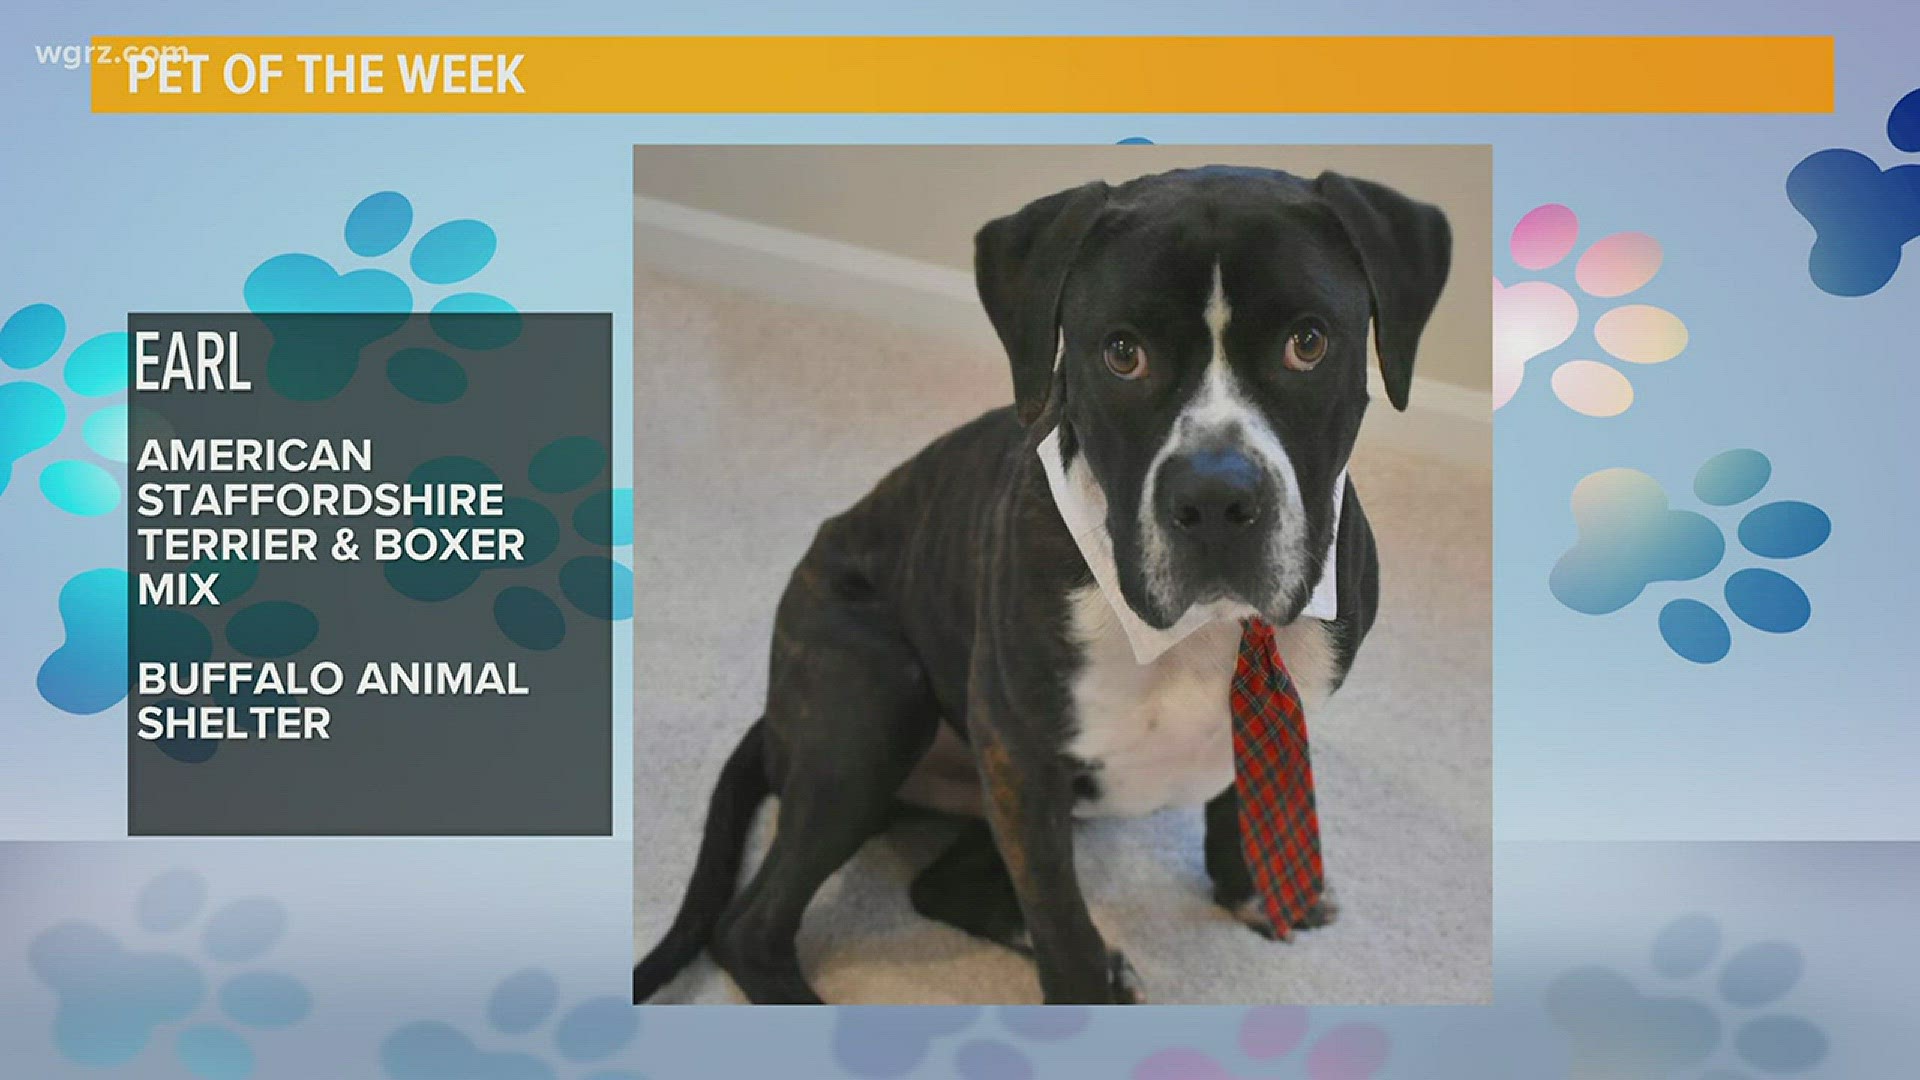 Meet Earl! This handsome boy is a lovable couch potato! Sound up your alley? Well he's also looking for a forever home.